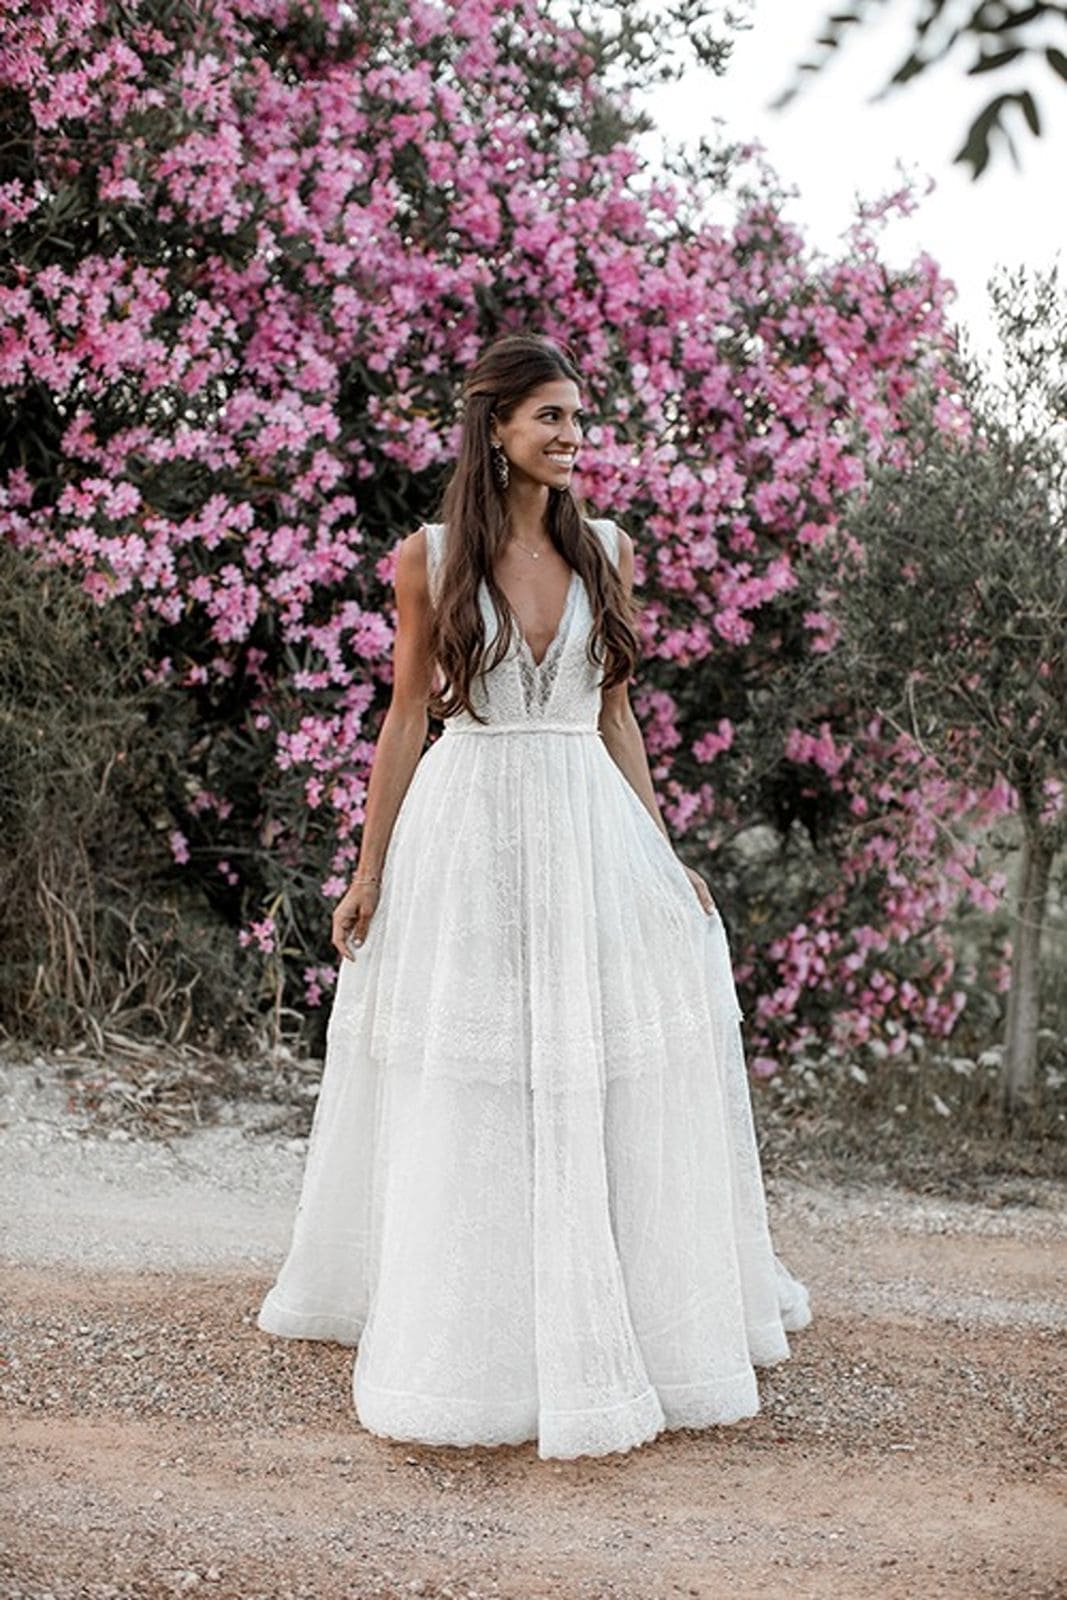 Bride stands in wedding gown in front of vibrant pink flowers in Ibiza Spain